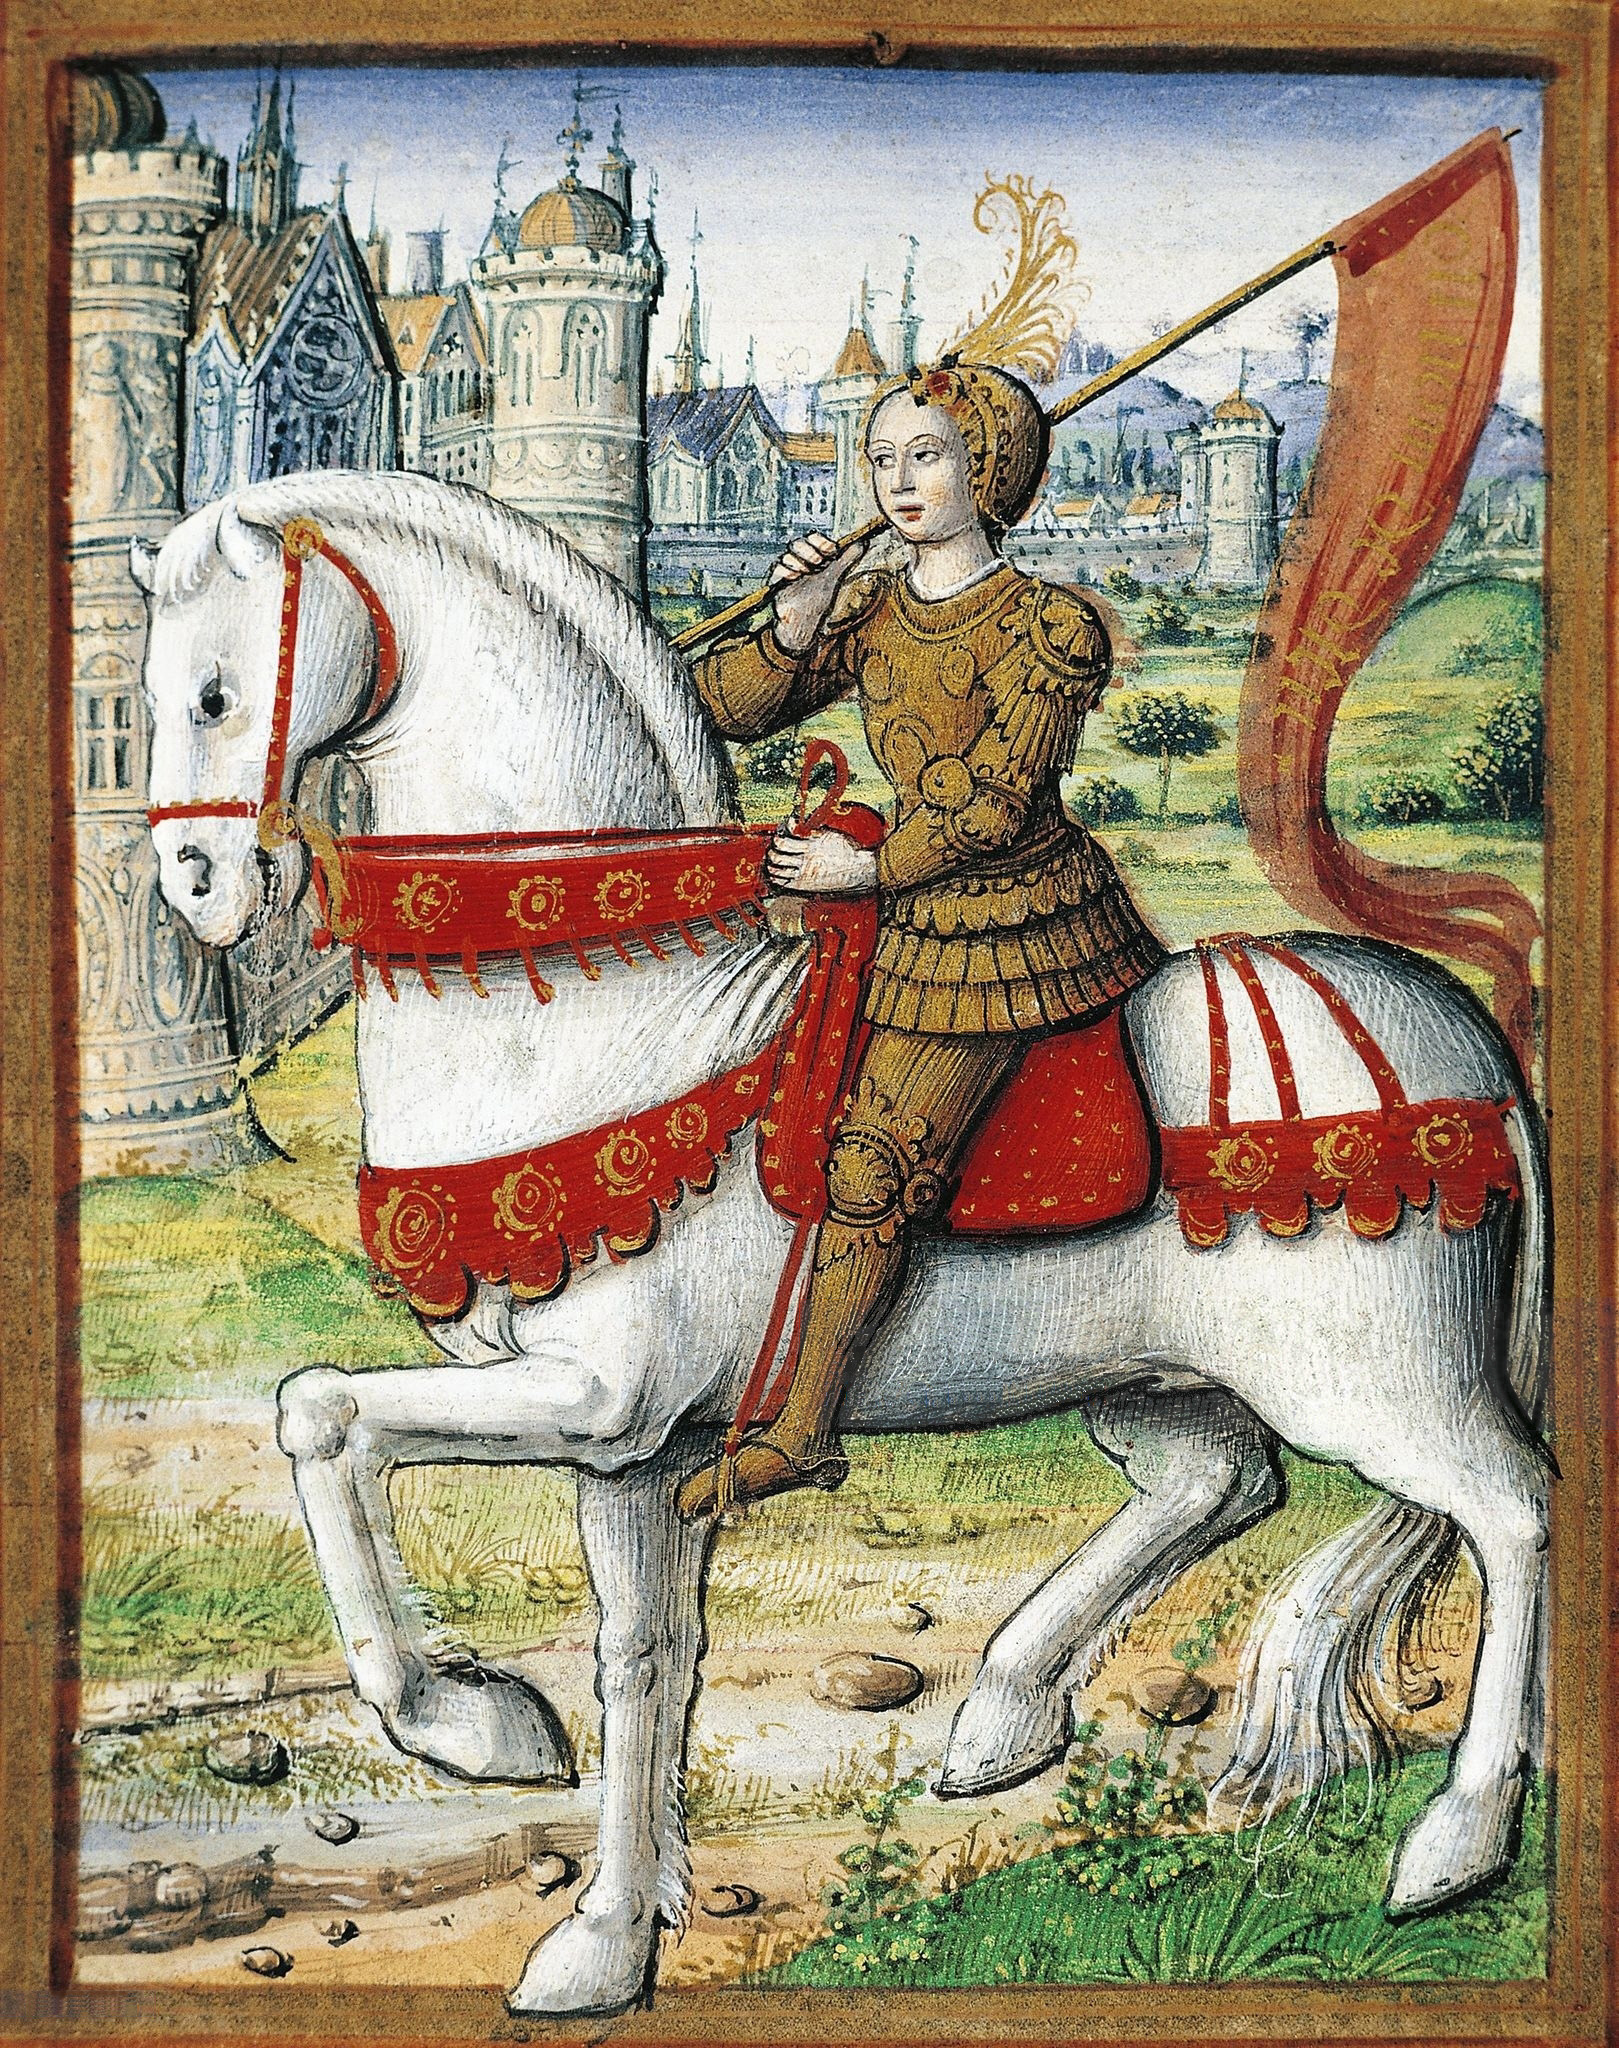 Johan of Arc. Oil on parchment and pigment painted between 15th century and 20th century by unknown artist. Collection: Archives nationales, Paris, France. Public Domain.